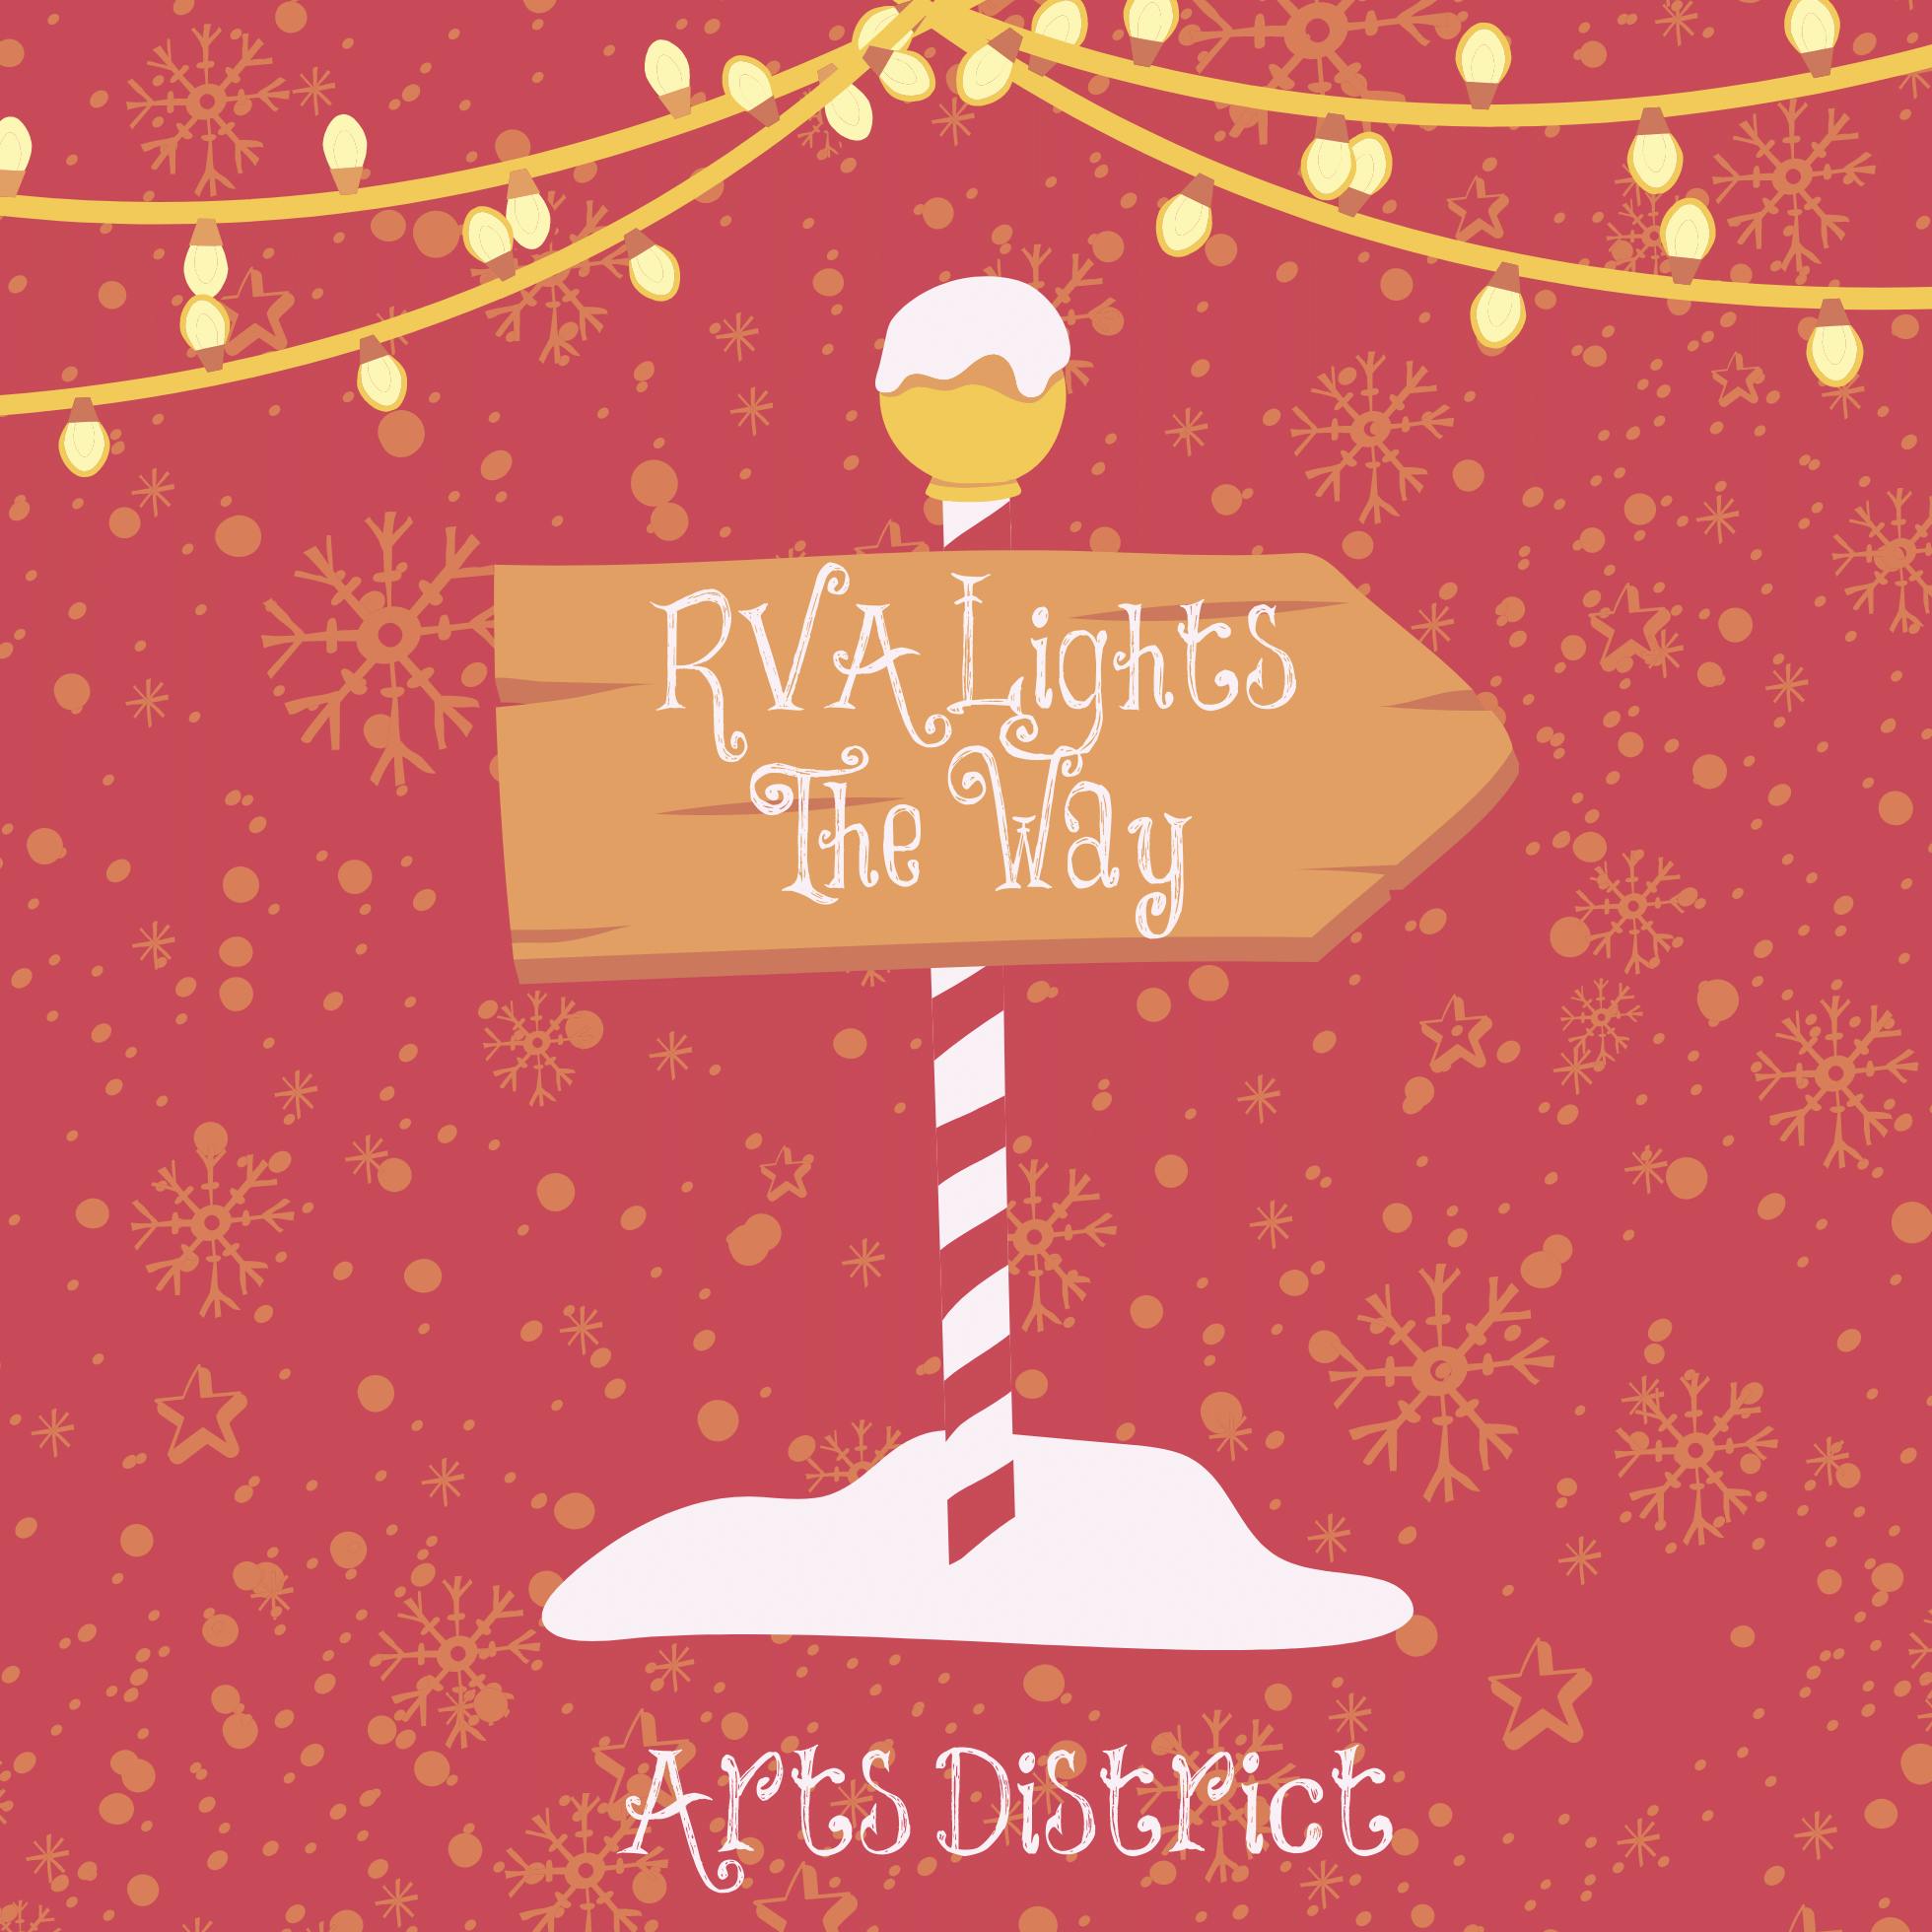 RVA Lights the Way: A Holiday Walking Tour of the Arts District